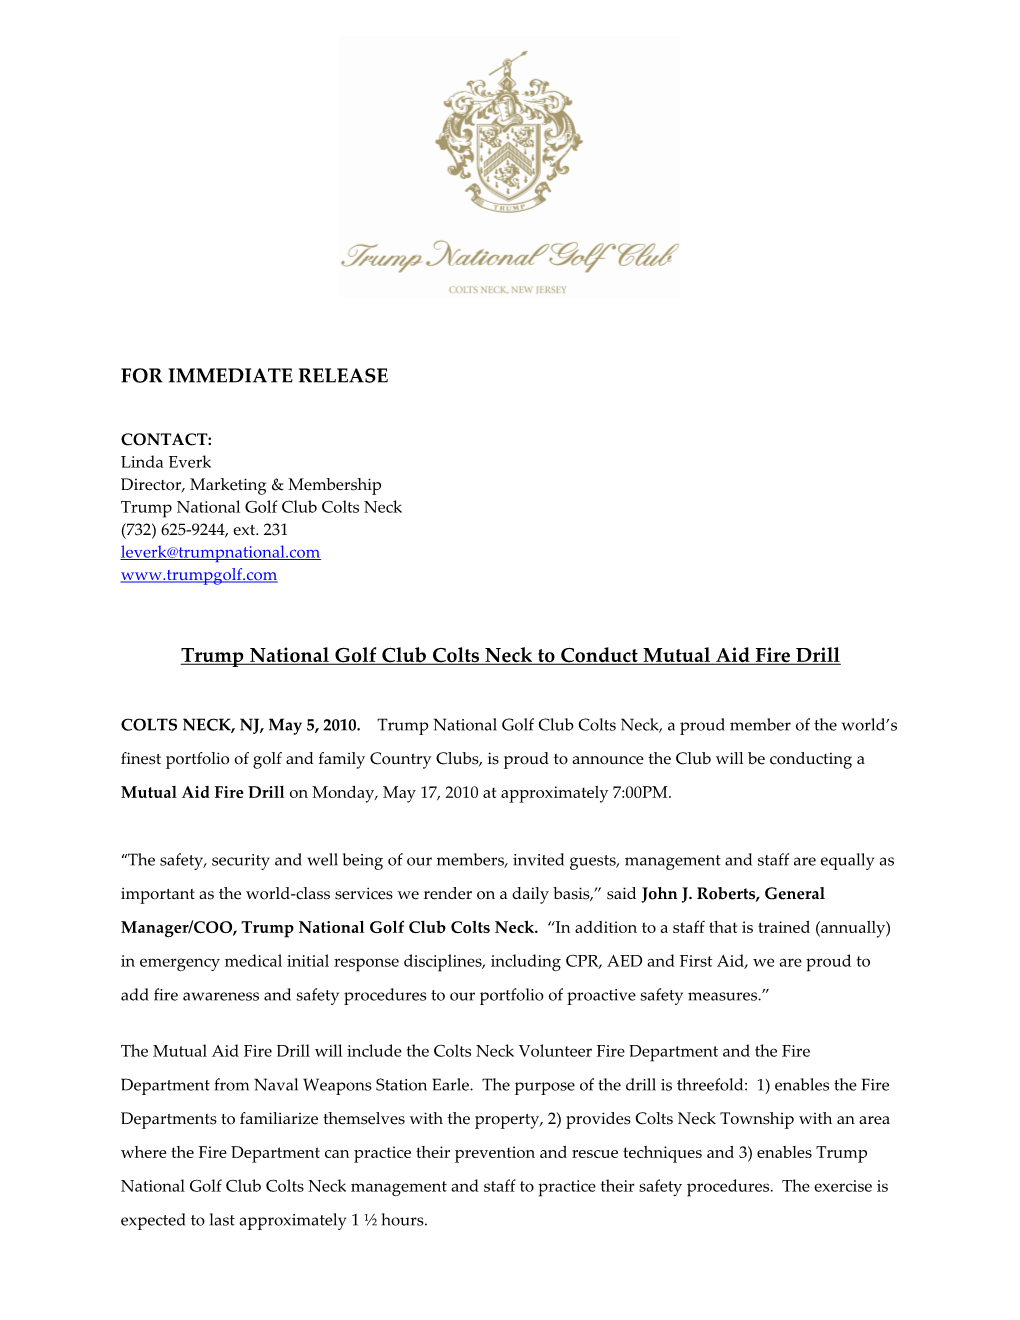 Trump National Golf Club Colts Neck to Conduct Mutual Aid Fire Drill